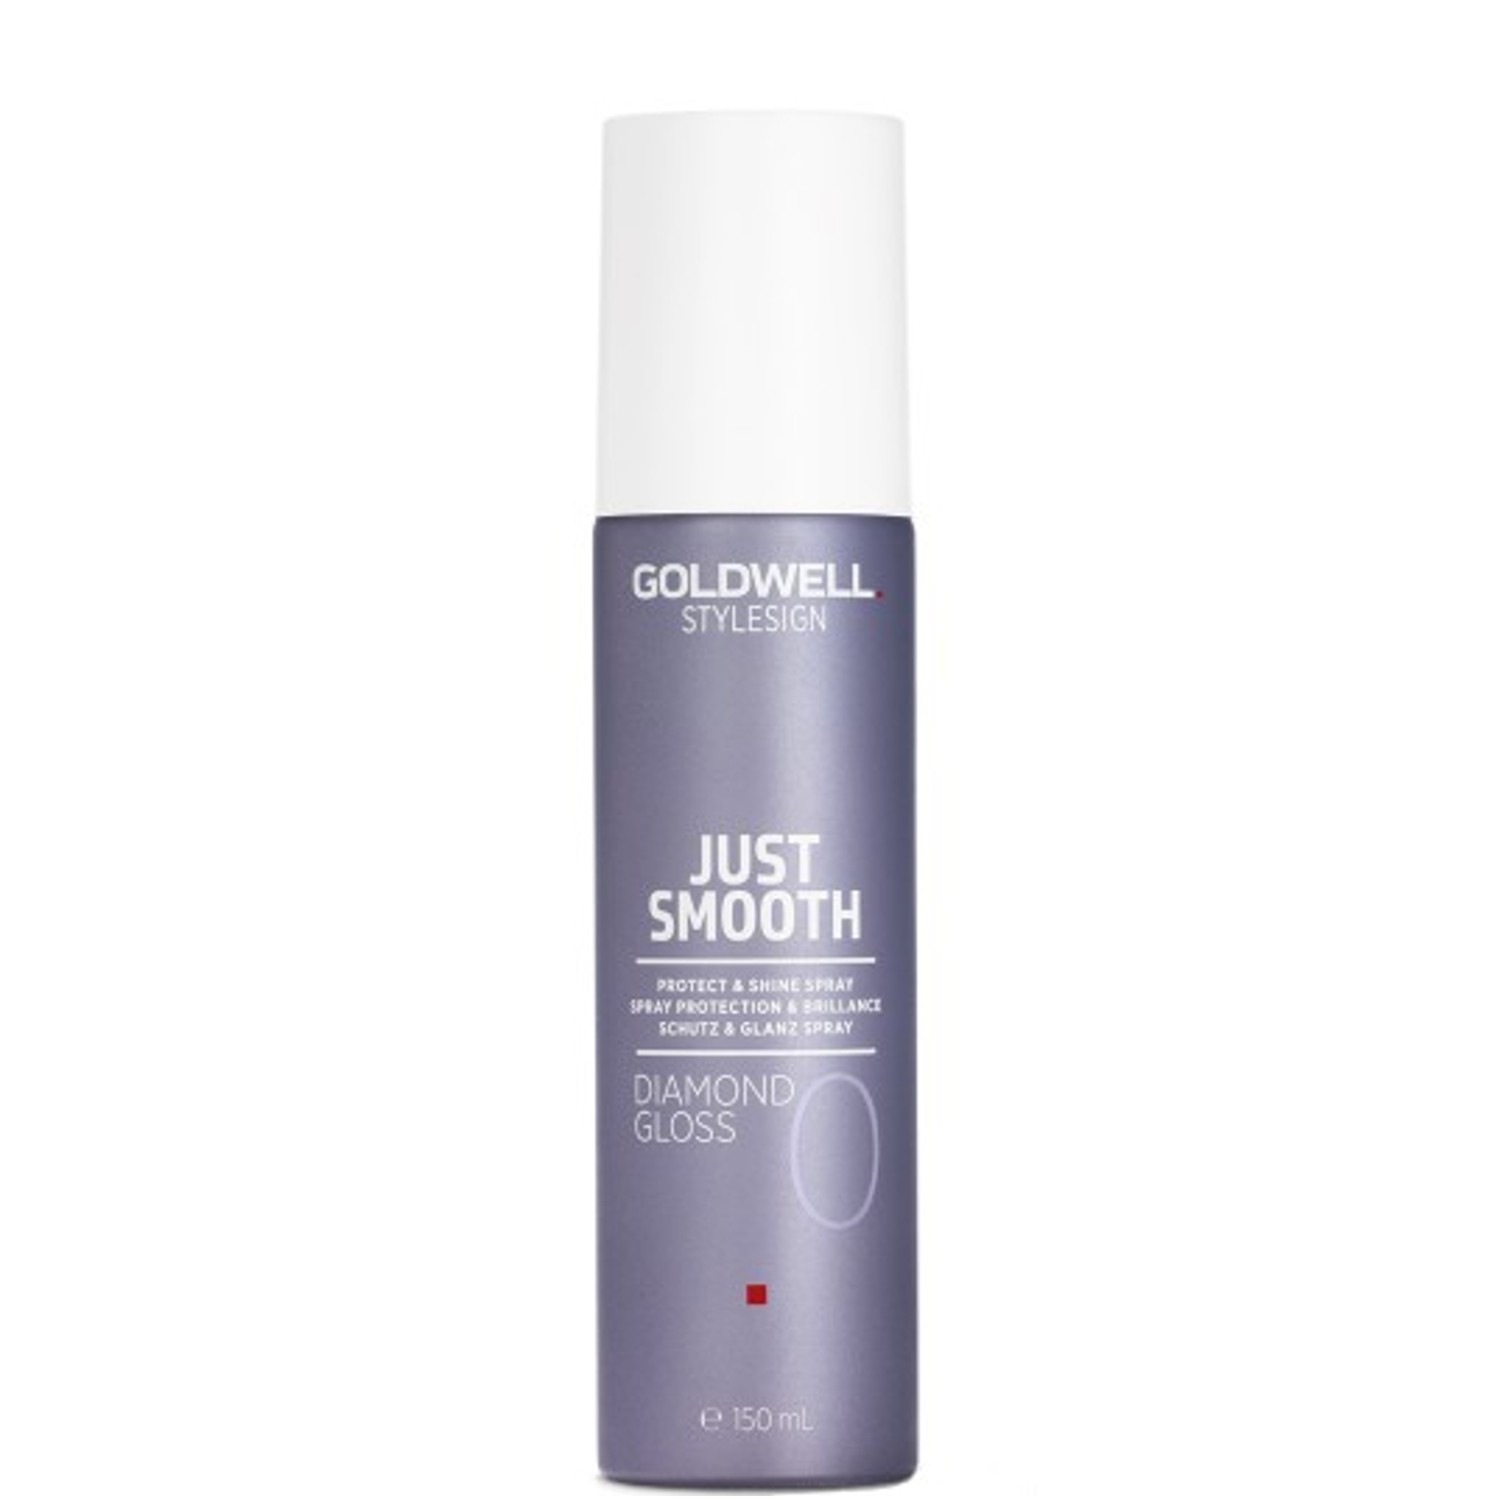 GOLDWELL Style Sign Just Smooth DIAMOND GLOSS 150 ml